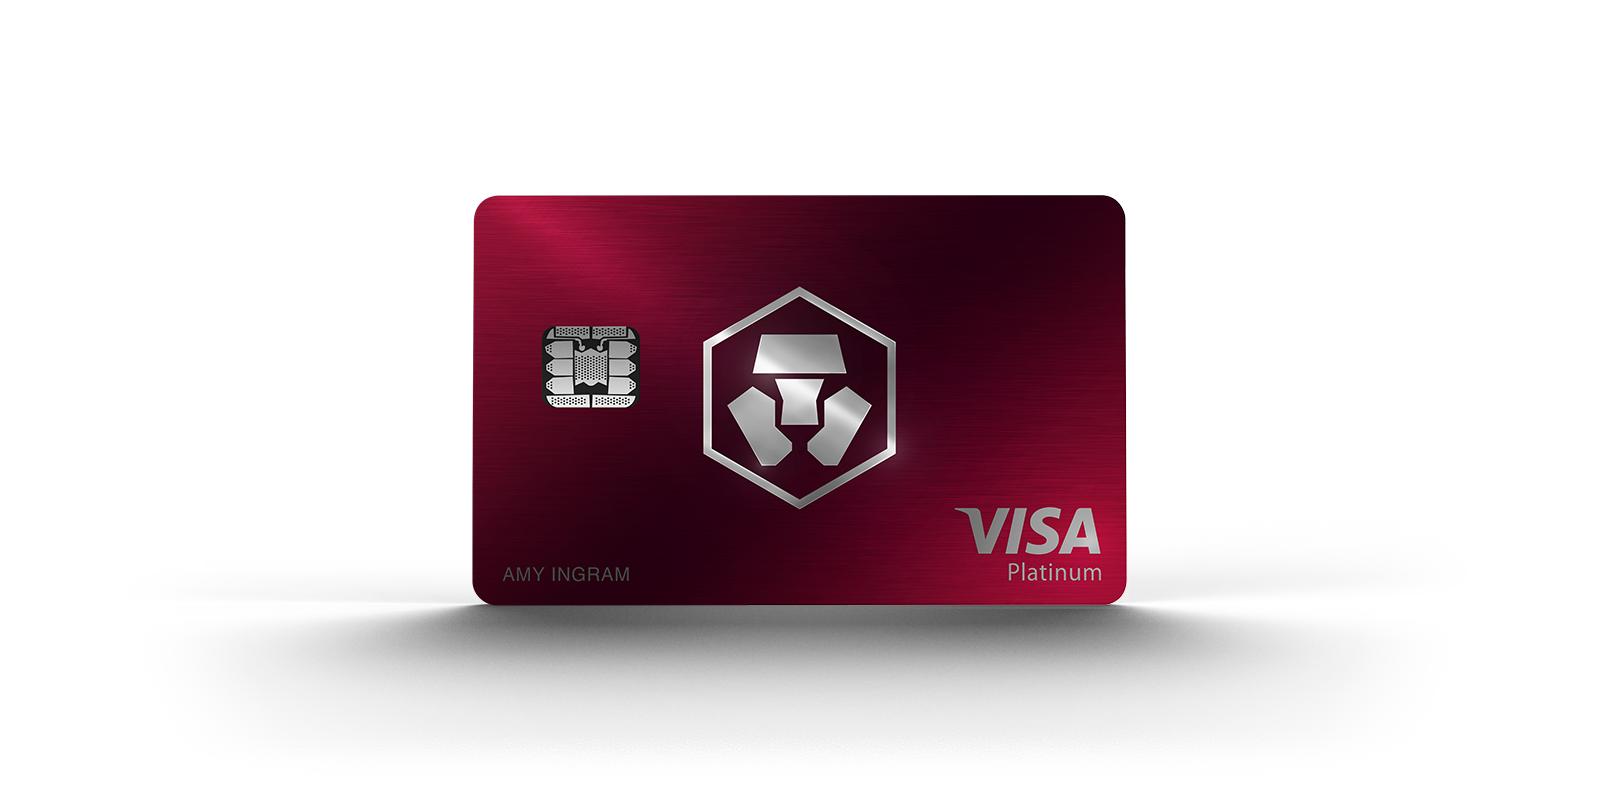 Crypto.com on X: "Look out, Singapore 🇸🇬The new MCO Visa Card design is  heading to the Lion City, starting with Ruby Steel -  https://t.co/NDfVSSgjpc #whatcolorwillyouchoose https://t.co/bflooCg7R9" / X